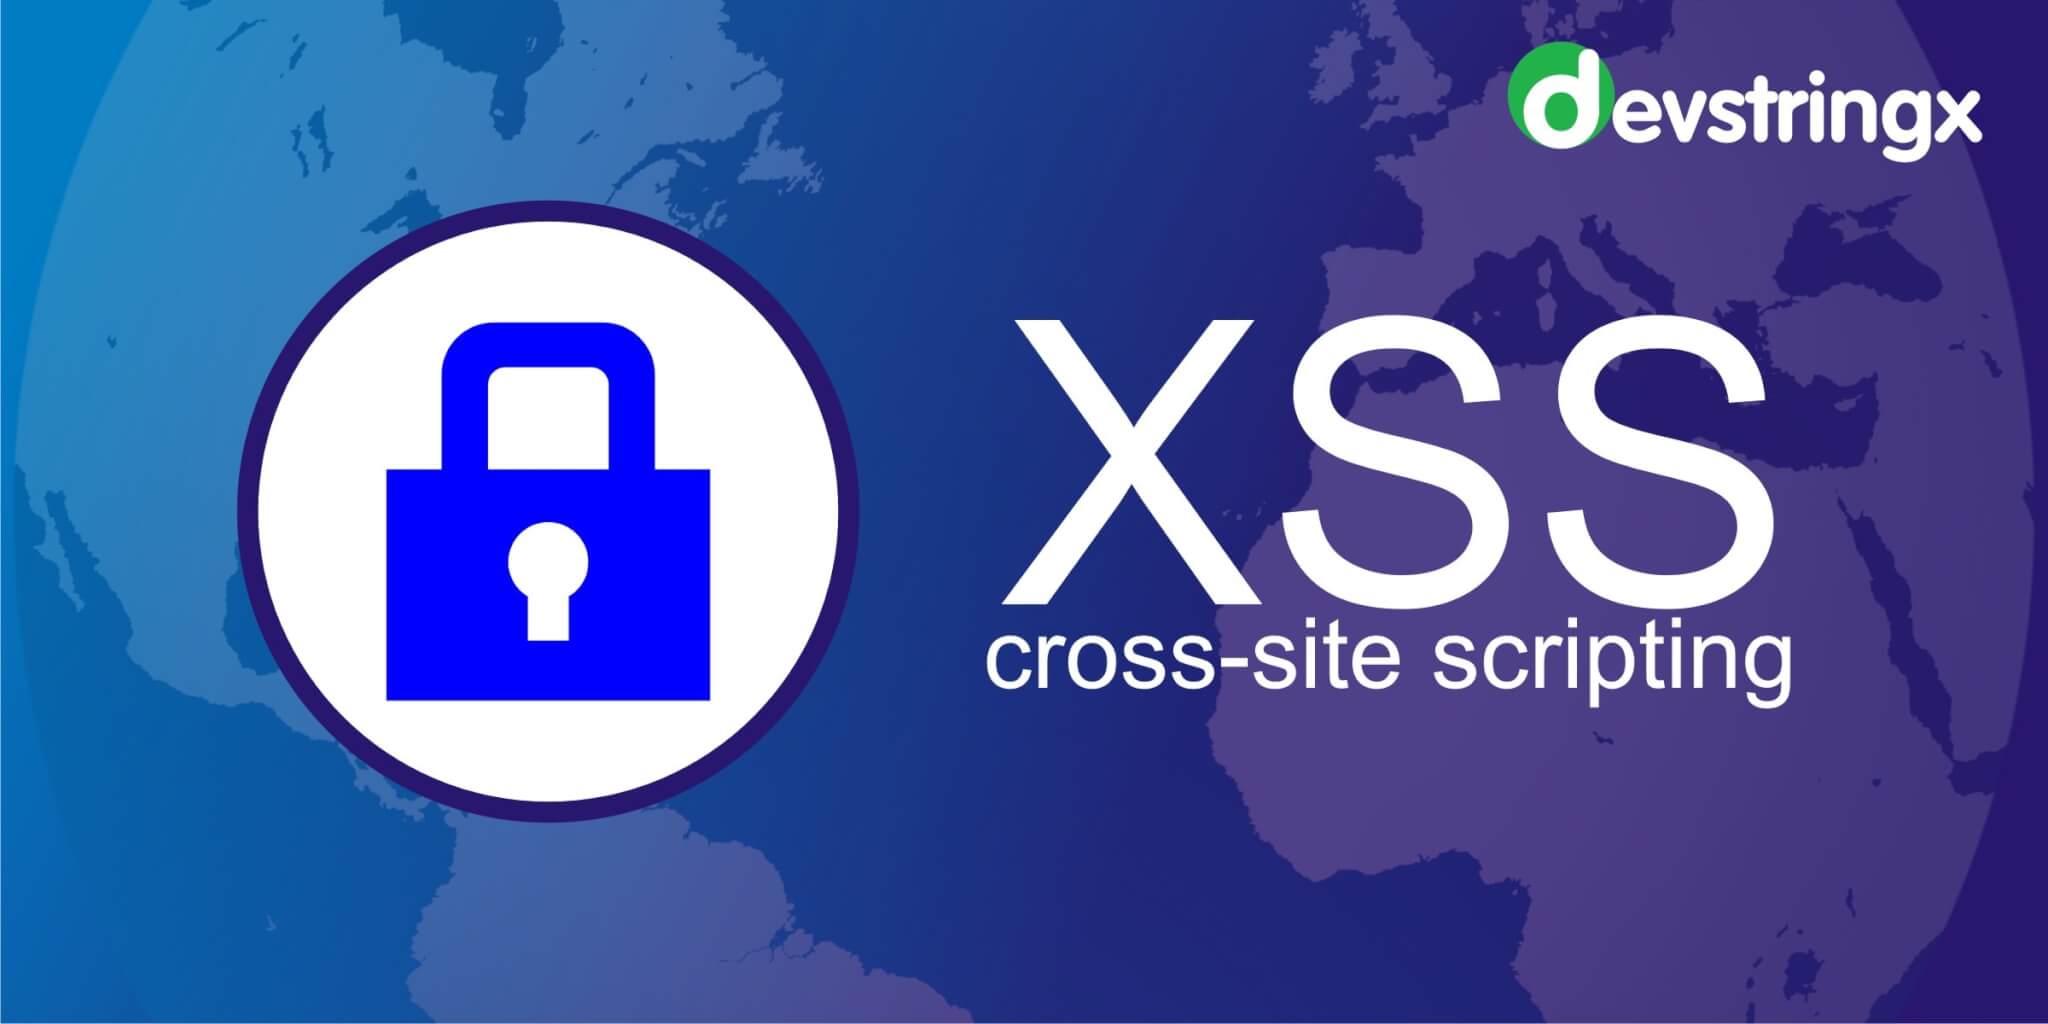 About cross-site scripting (XSS) attacks